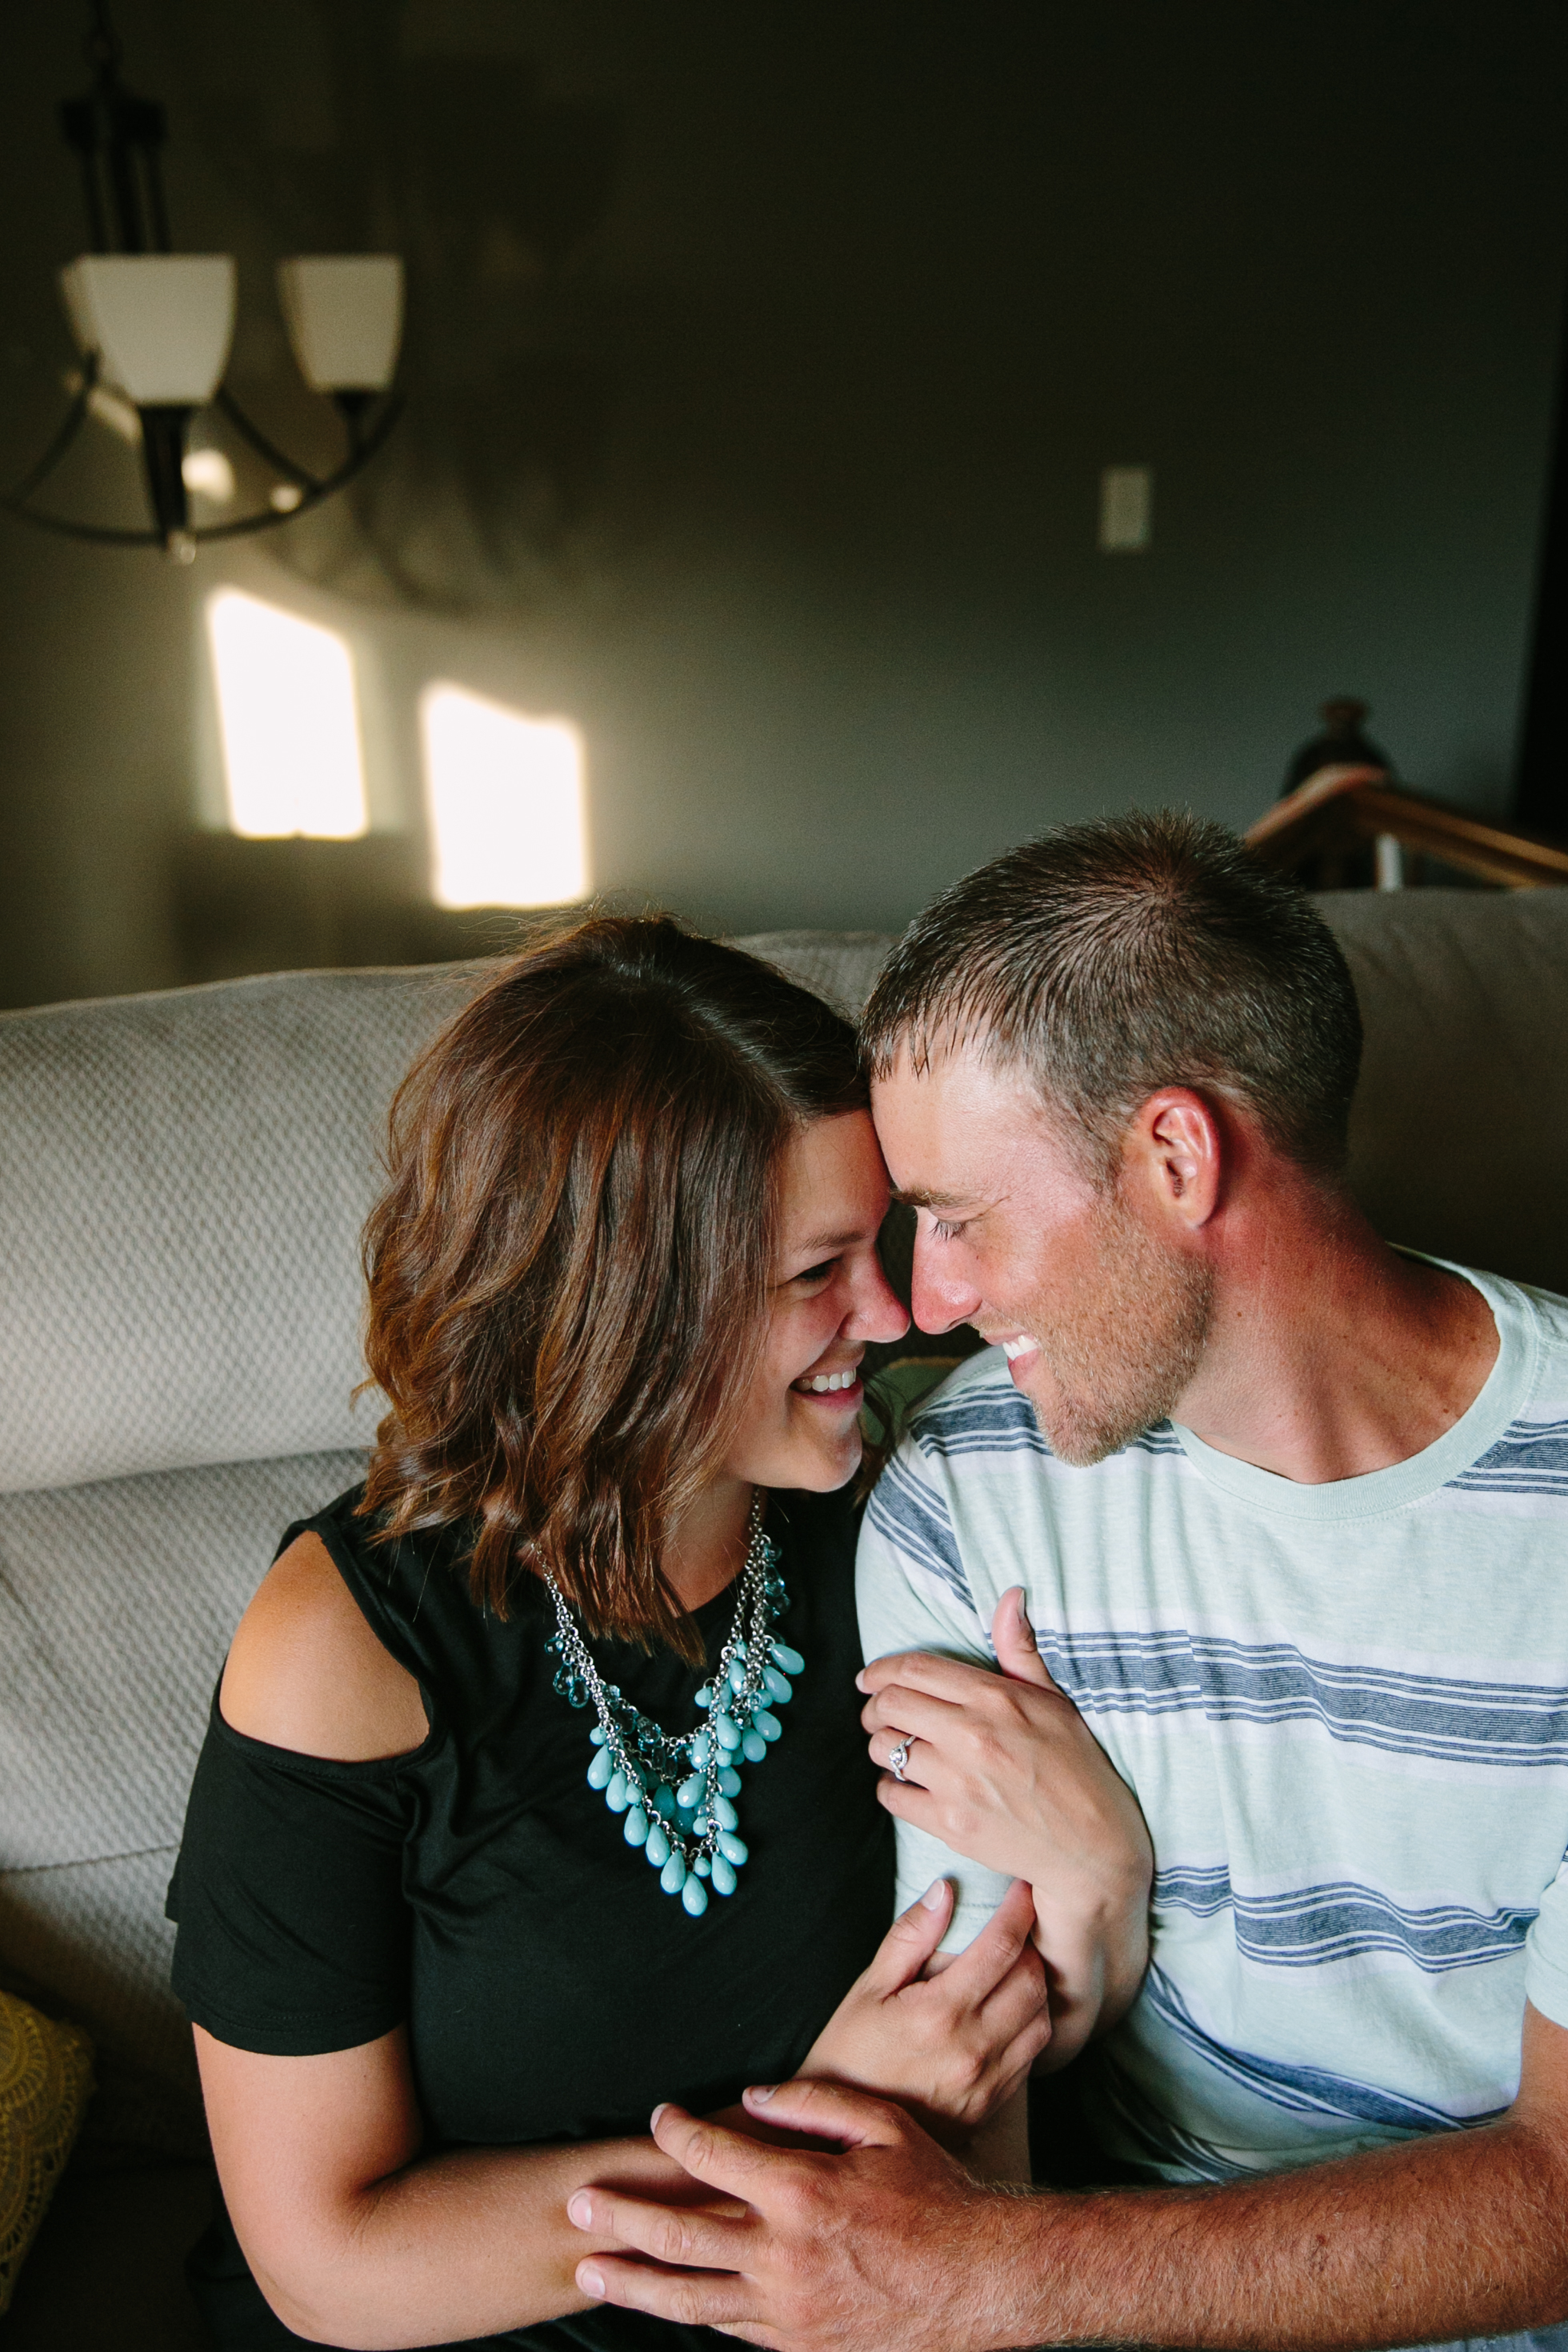 in-home dubuque engagement session by catherine furlin photography, couple snuggling on couch